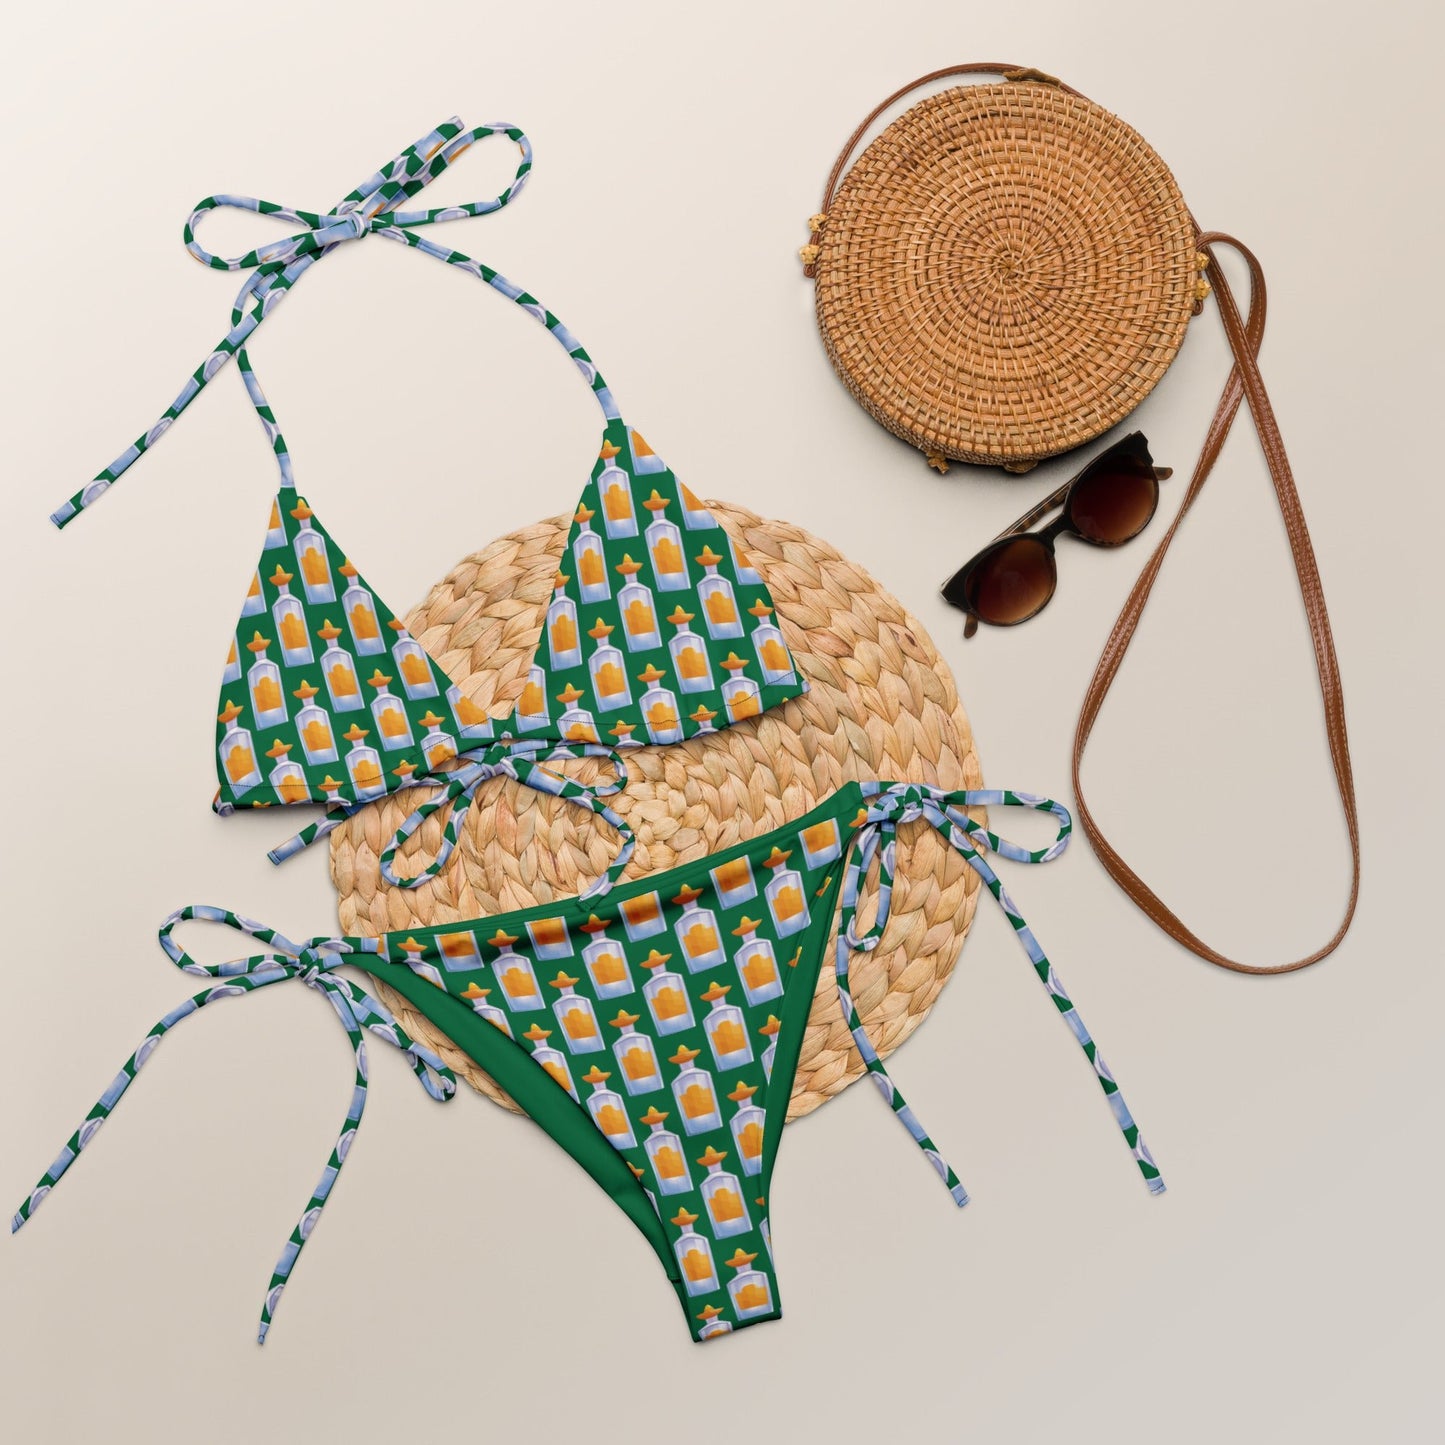 All-over print recycled string bikini - Shell Yeah by Jaks2XS6728797_16553